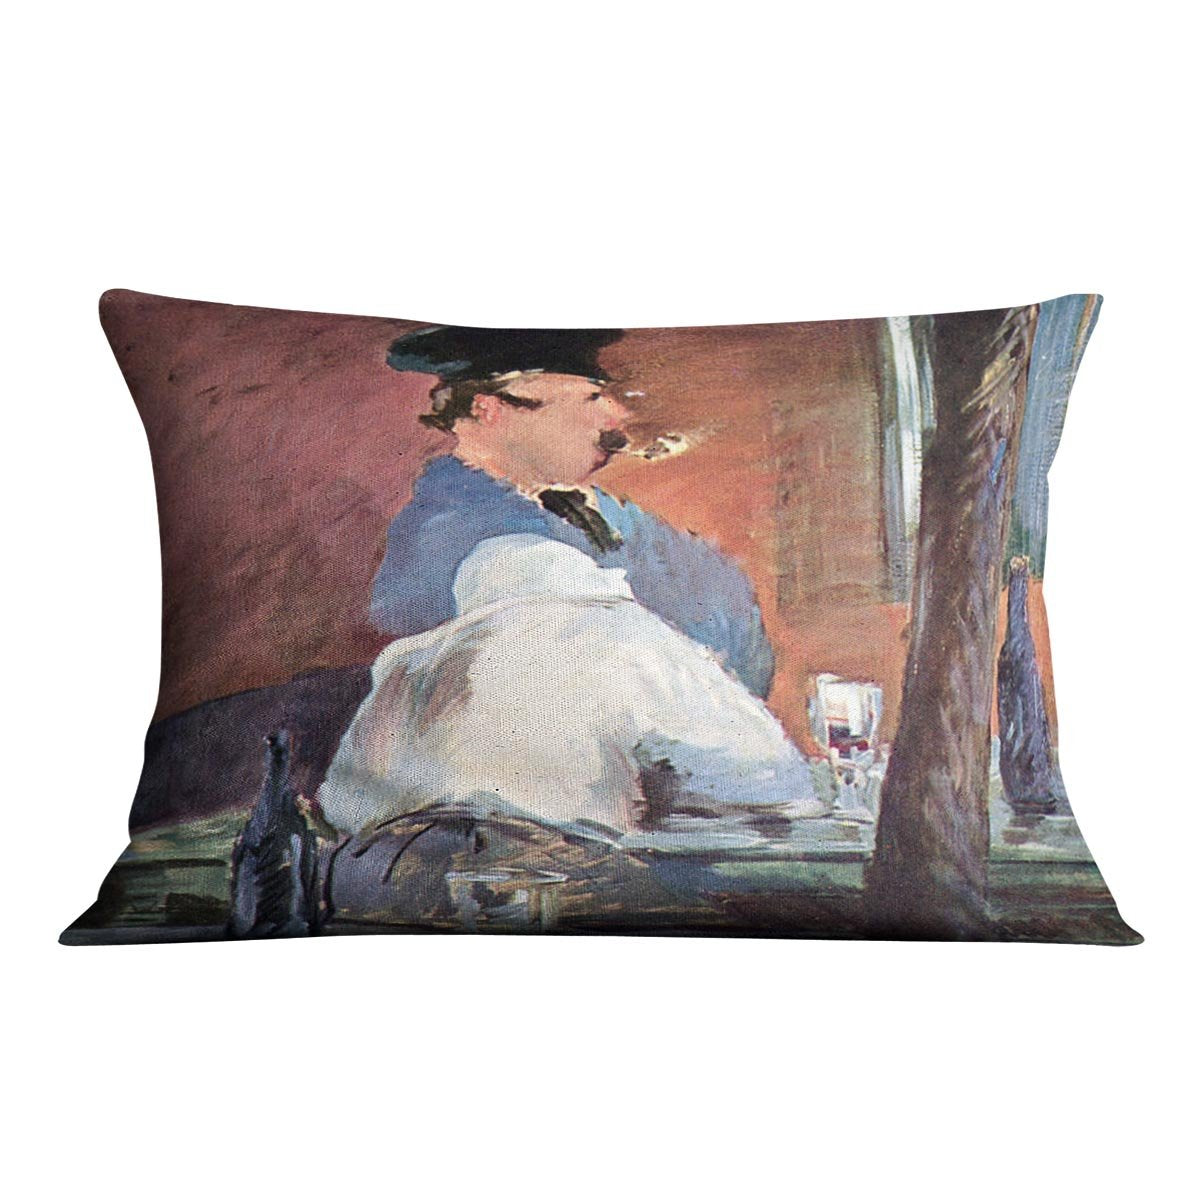 Tavern by Manet Throw Pillow